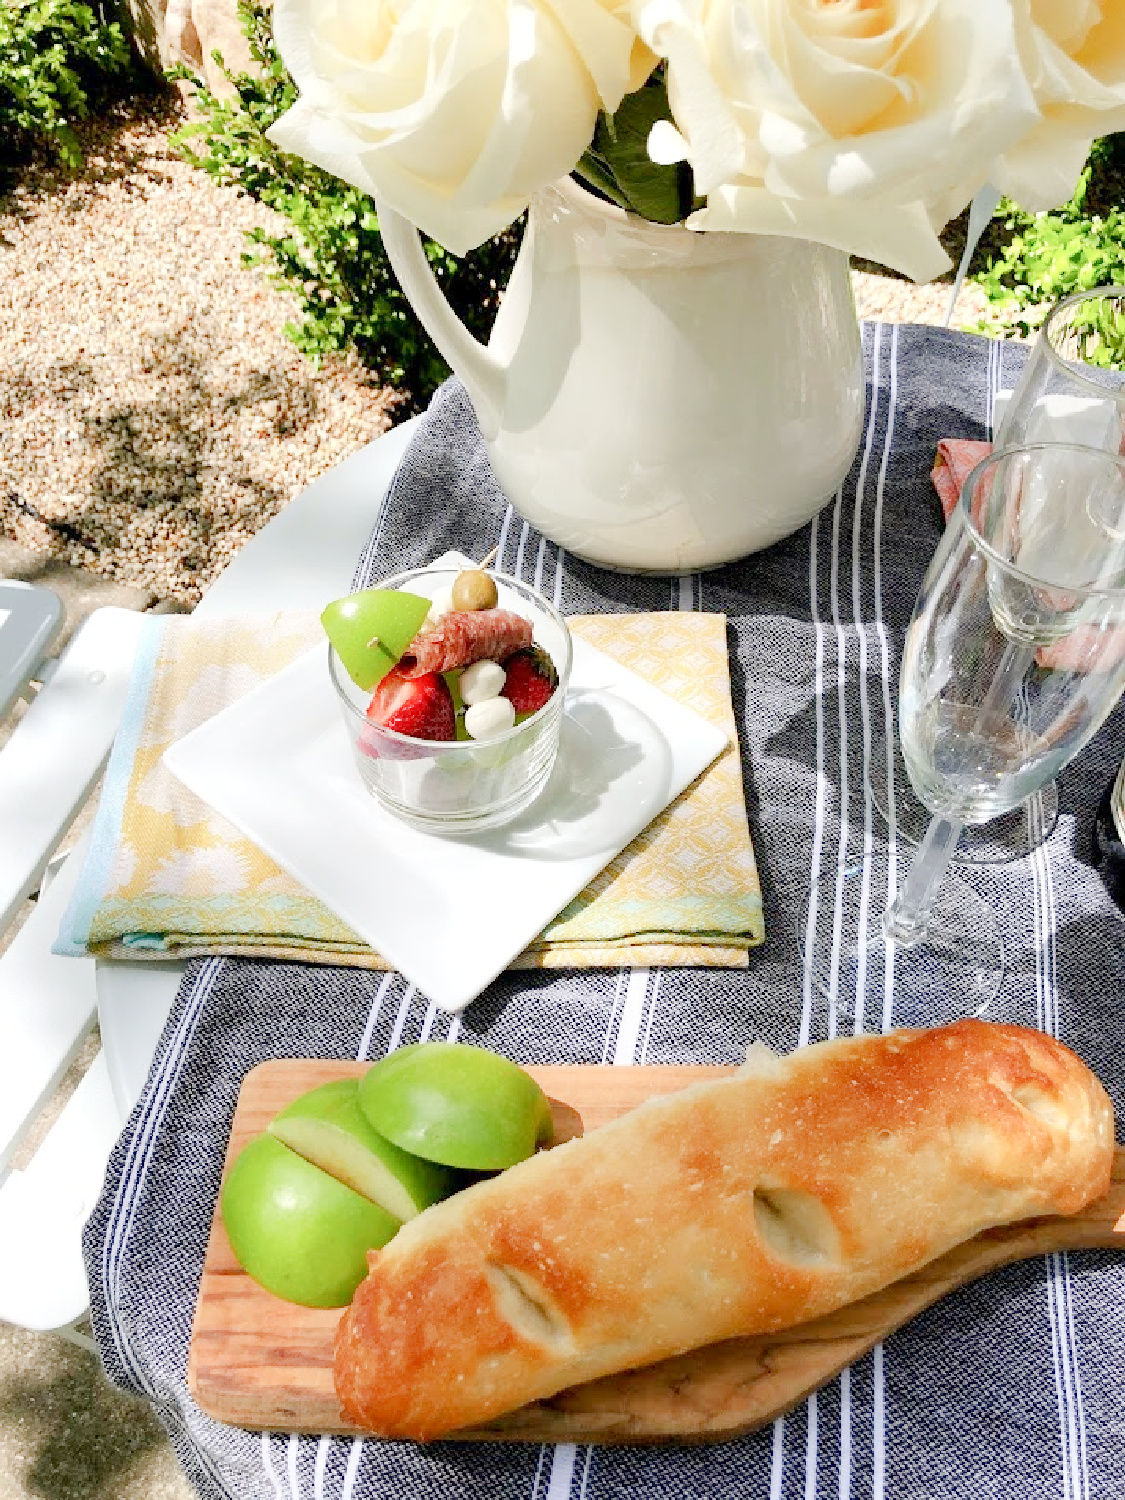 Jarcuterie and baguette on a charming round French cafe dining table in the garden - Hello Lovely Studio. #jarcuterie #frenchpicnic #frenchaesthetic #outdoordining